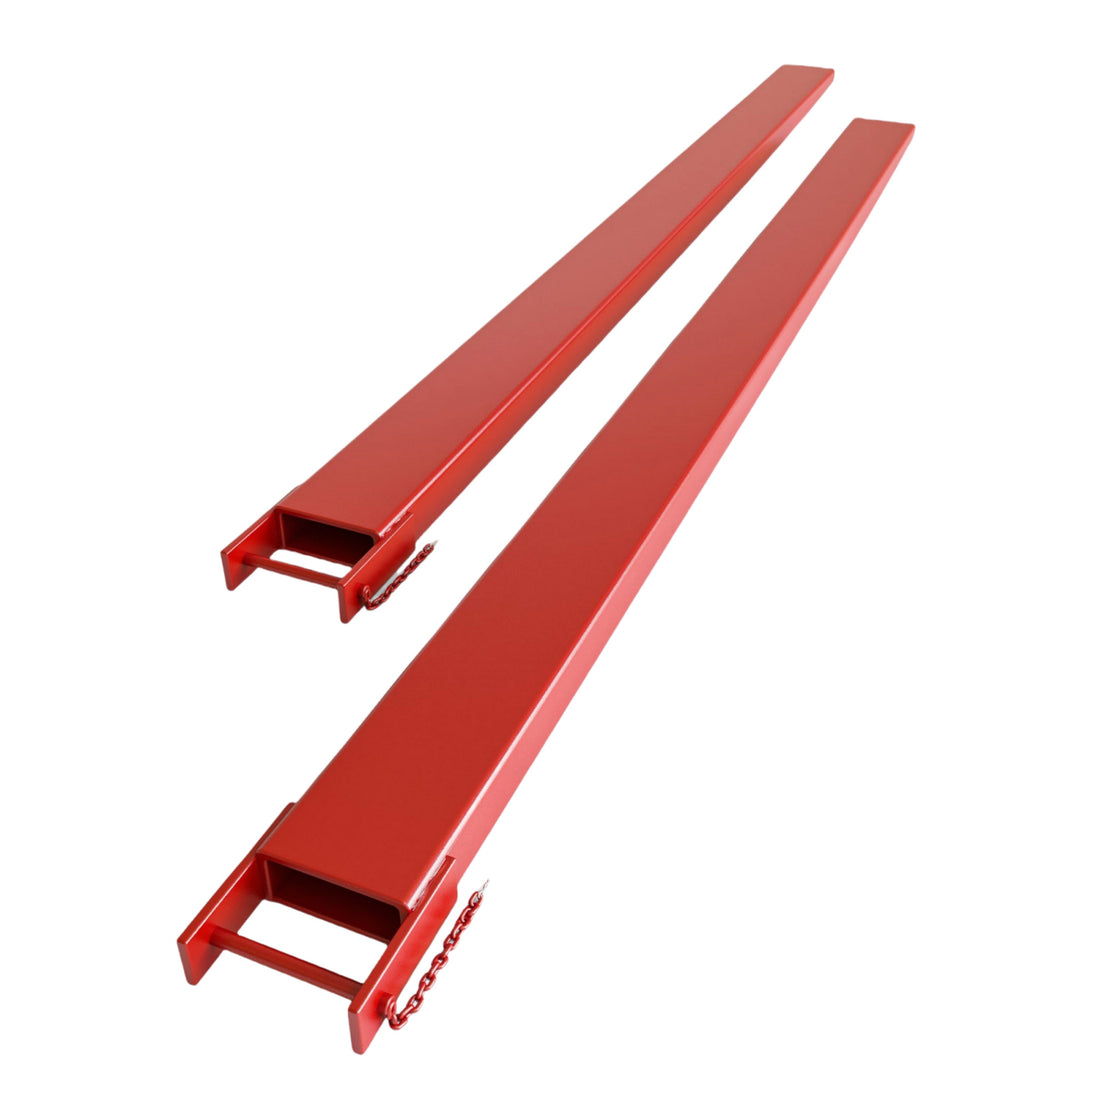 Forklift Pallet Extensions, Fork Extensions 5.3 Inch Width, 5500 LBS Capacity Heavy Duty Fork Extensions for Forklifts, 1 Pair Forklift Extensions for Forklift Truck